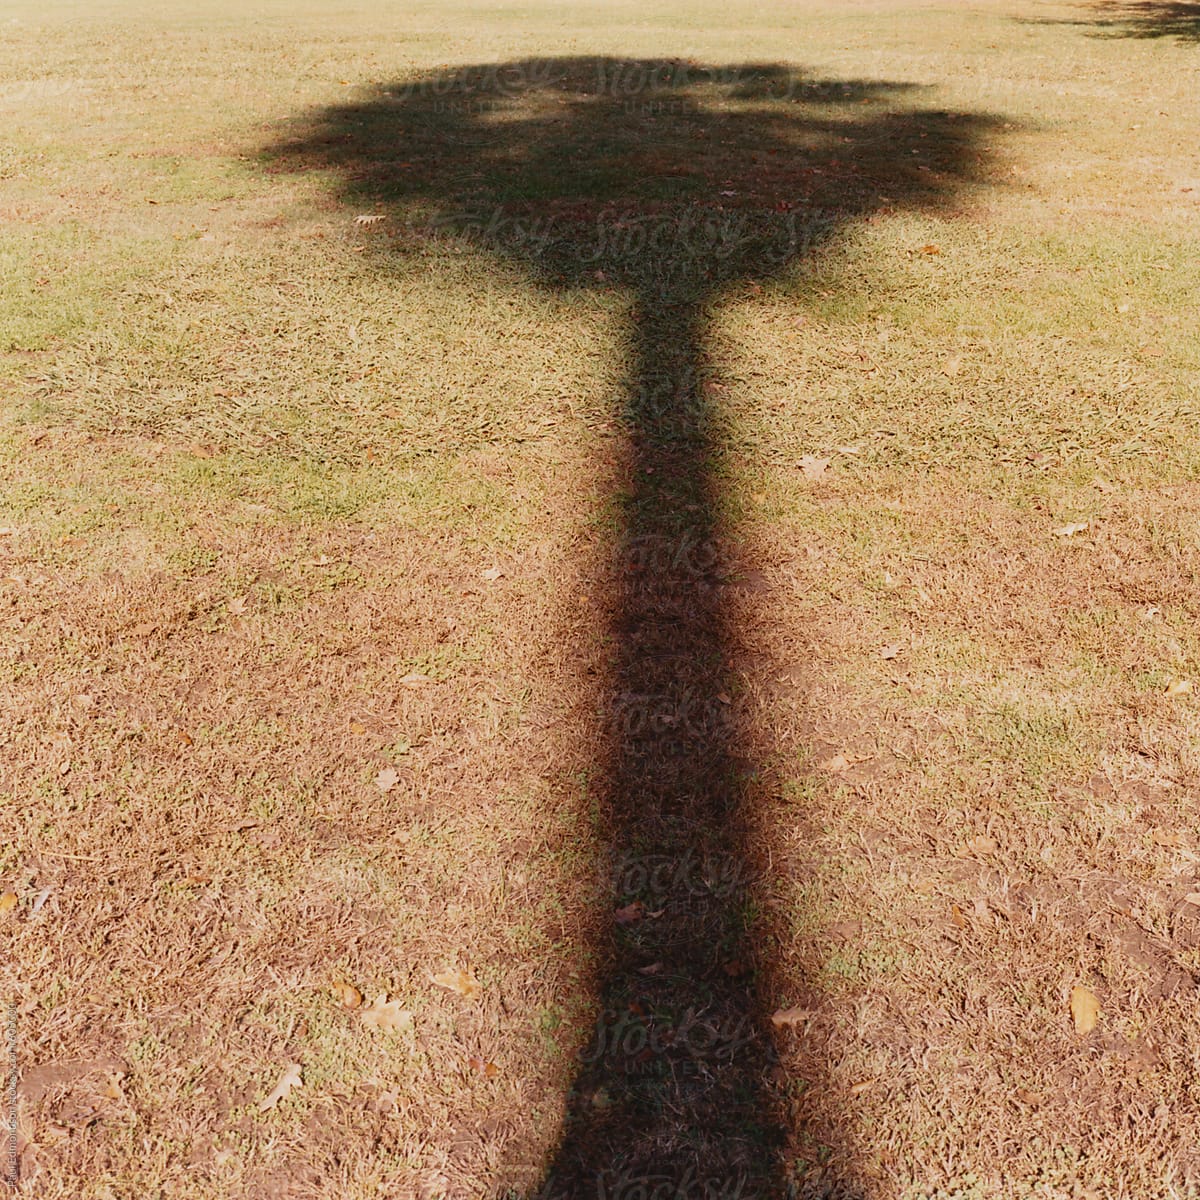 Shadow of palm tree on dry grass